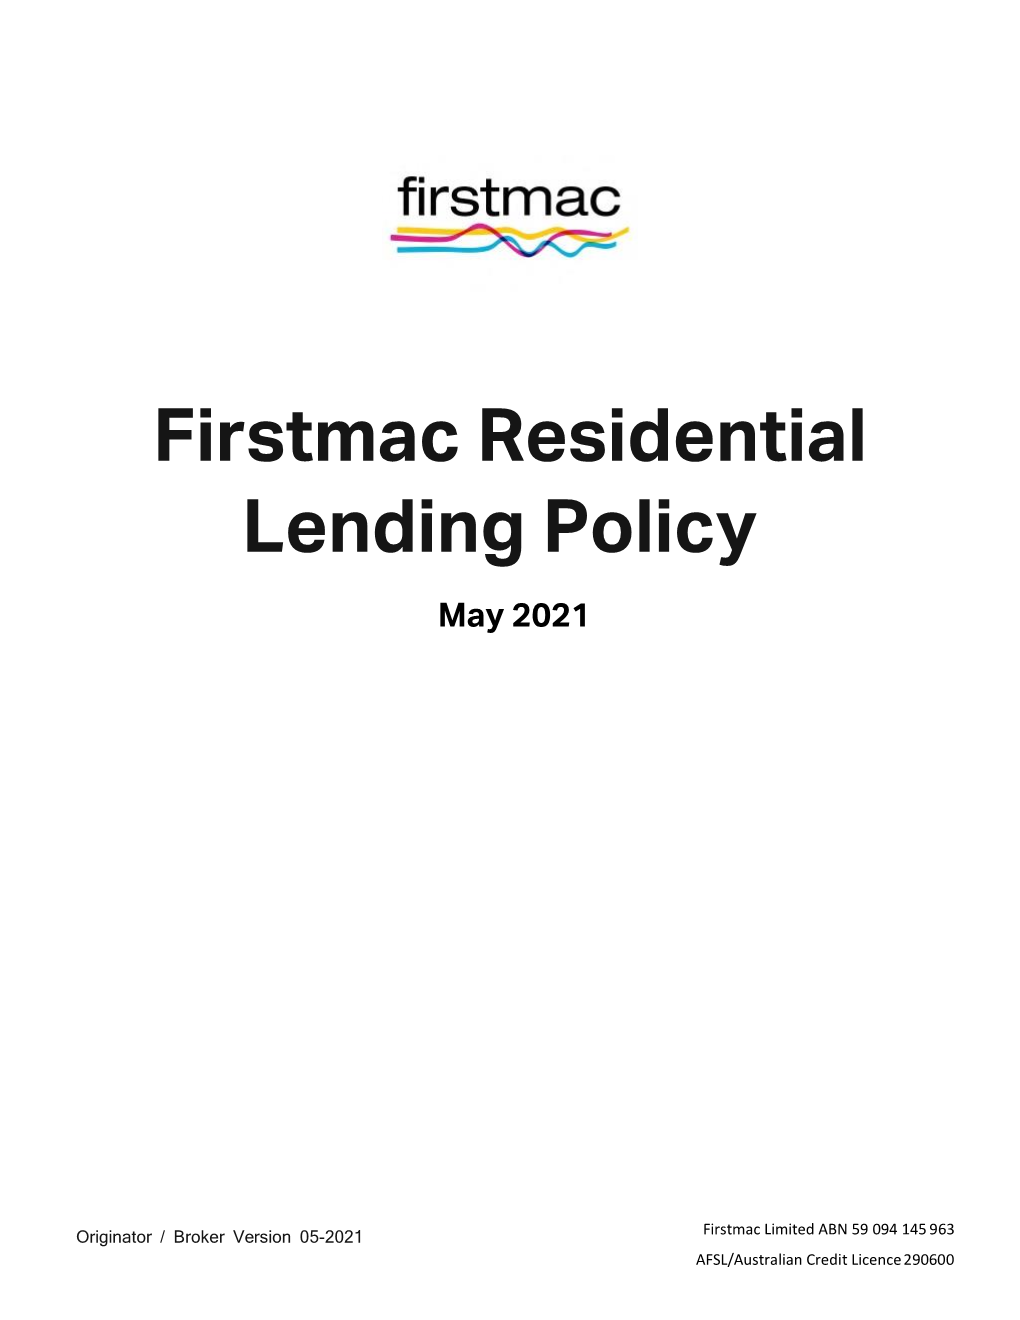 Firstmac-Residential-Lending-Policy